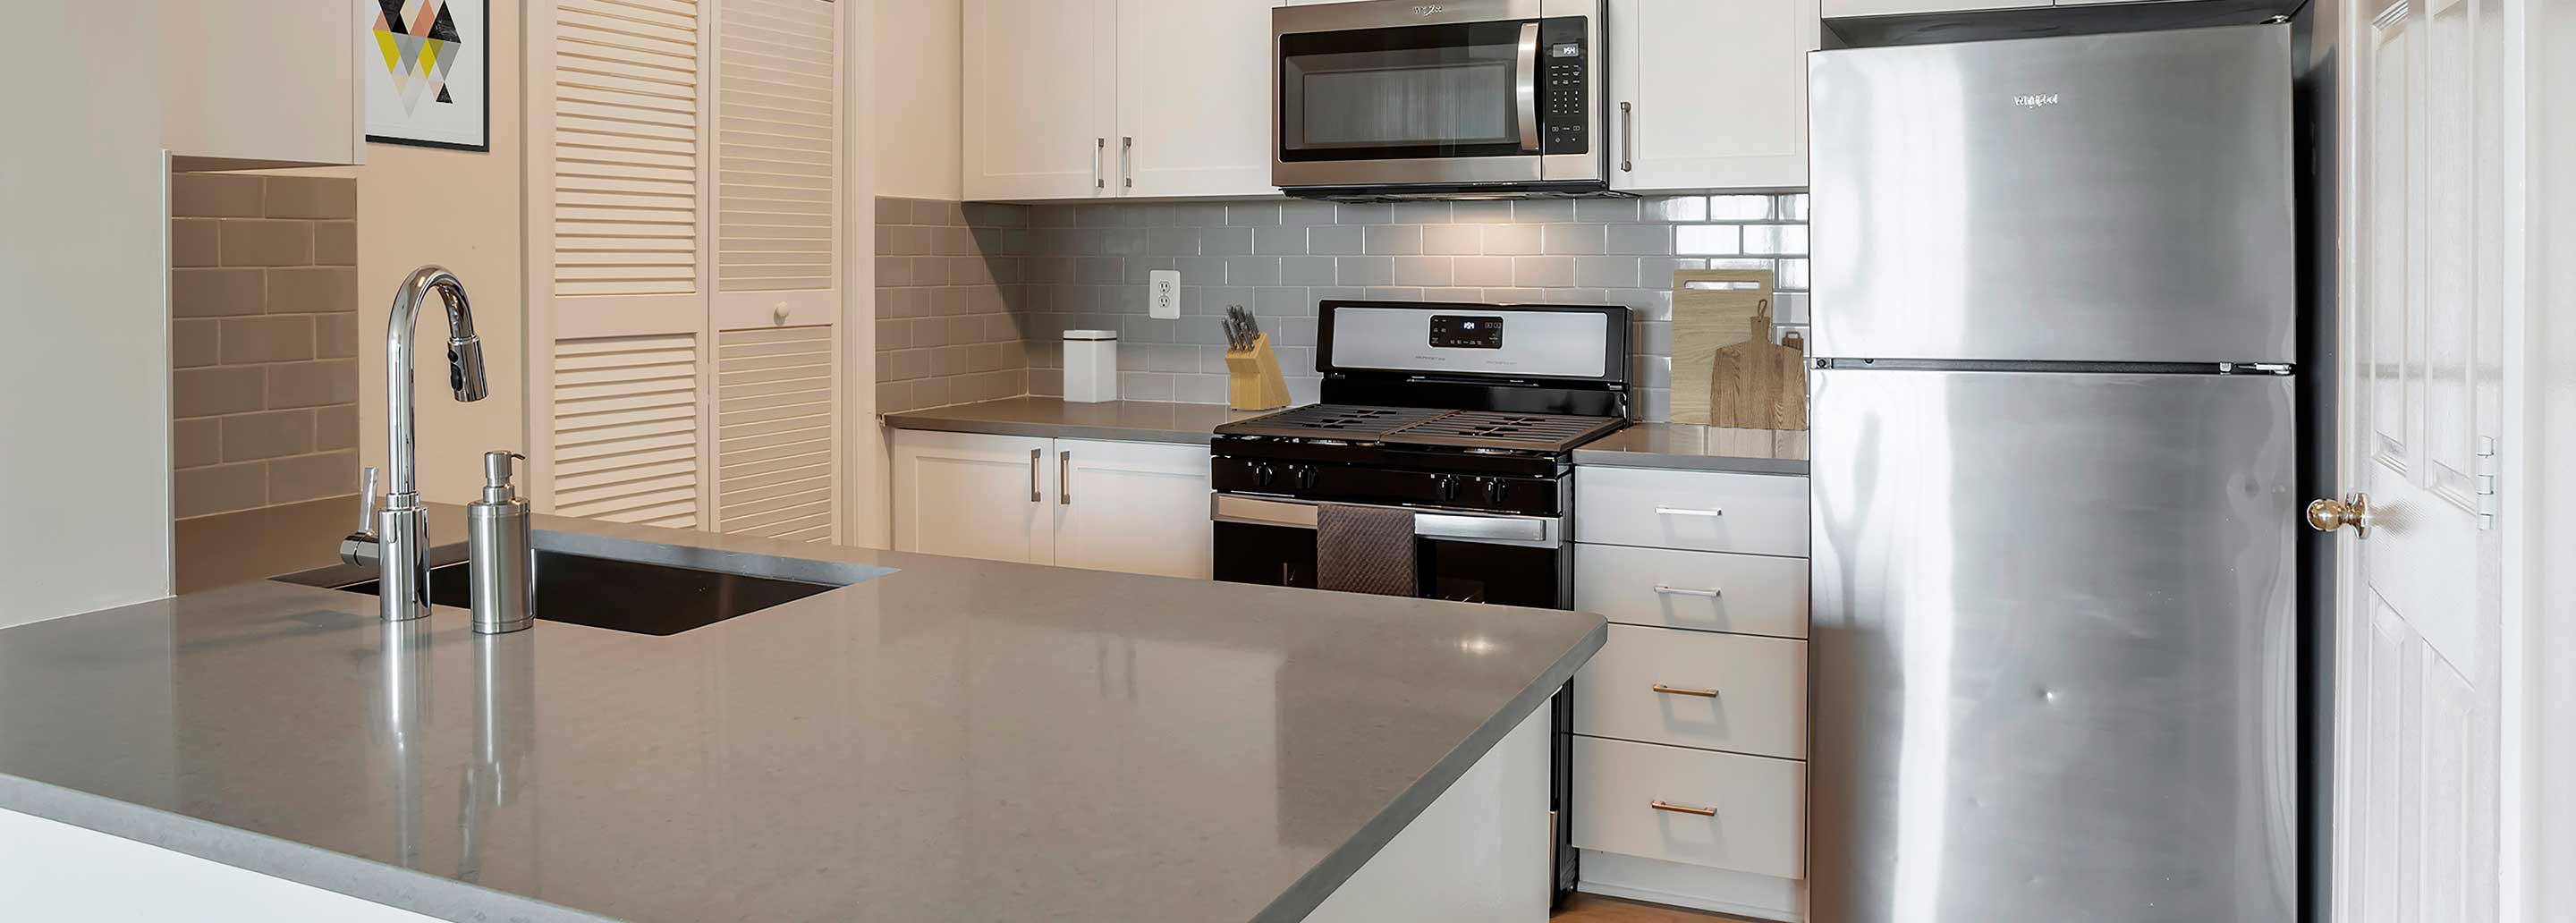 Finish Package II kitchen with white cabinetry, grey quartz countertops, stainless steel appliances and tile backsplash